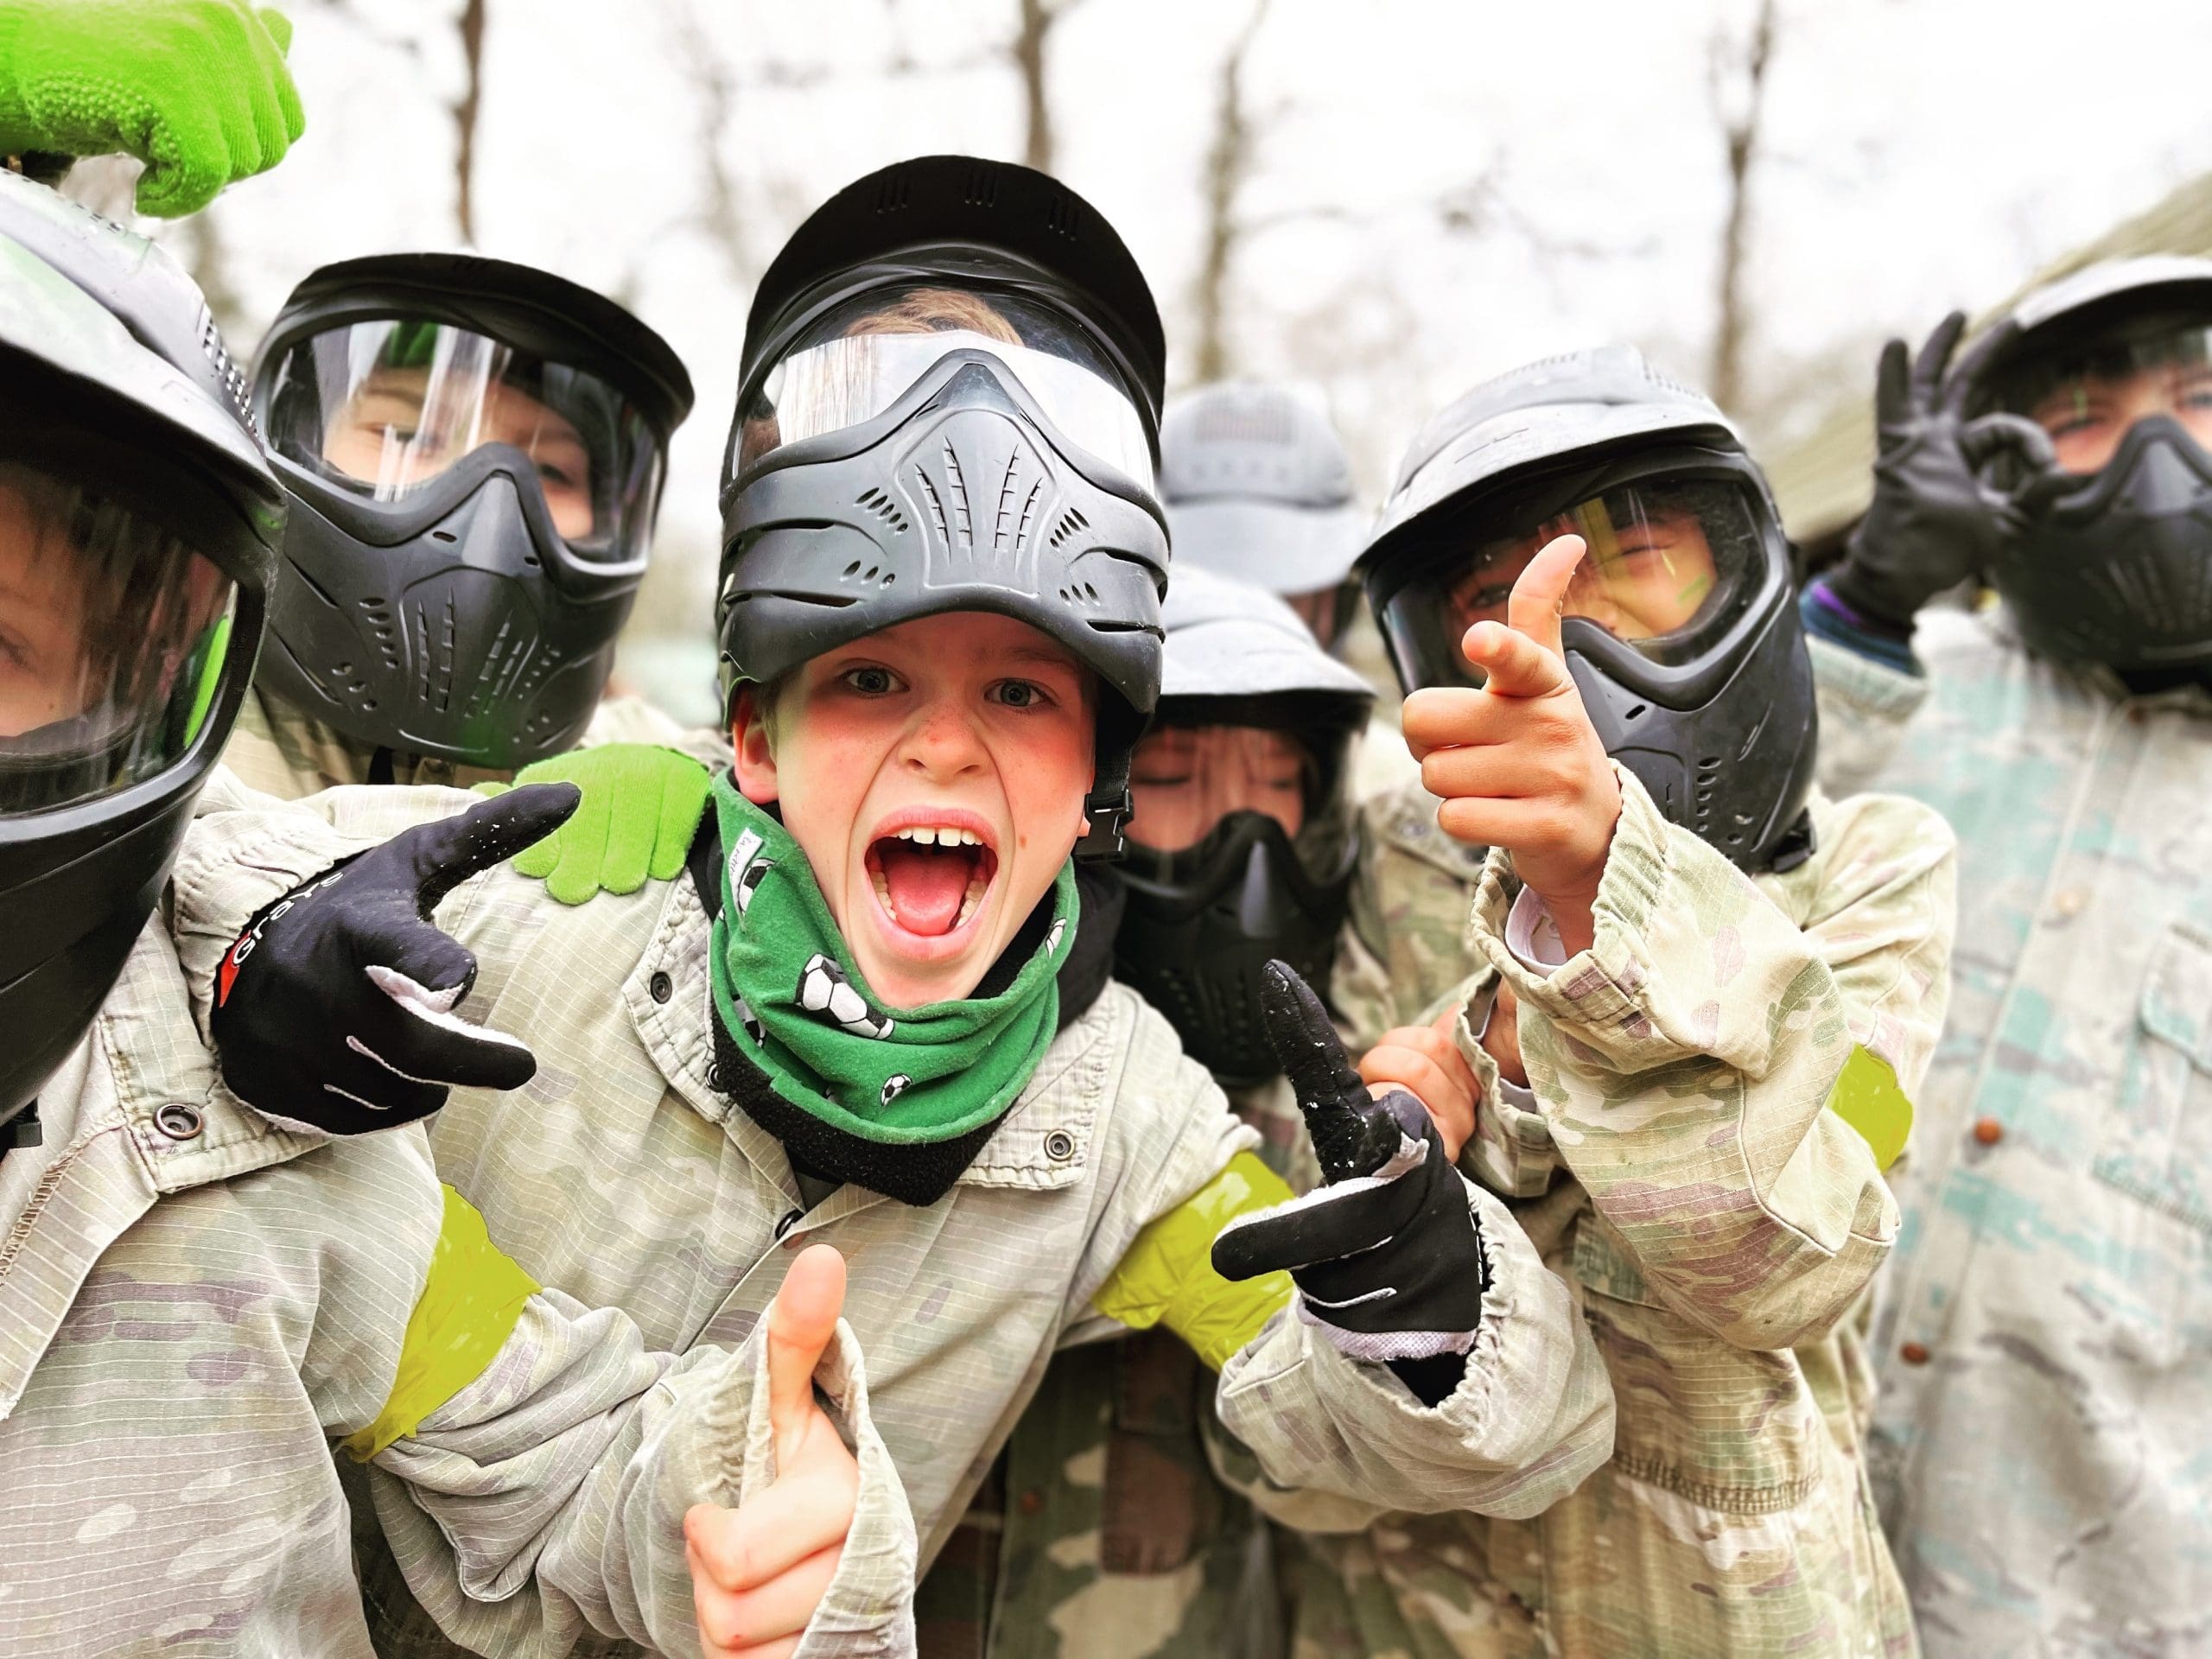 Fun for everyone at Campaign Paintball